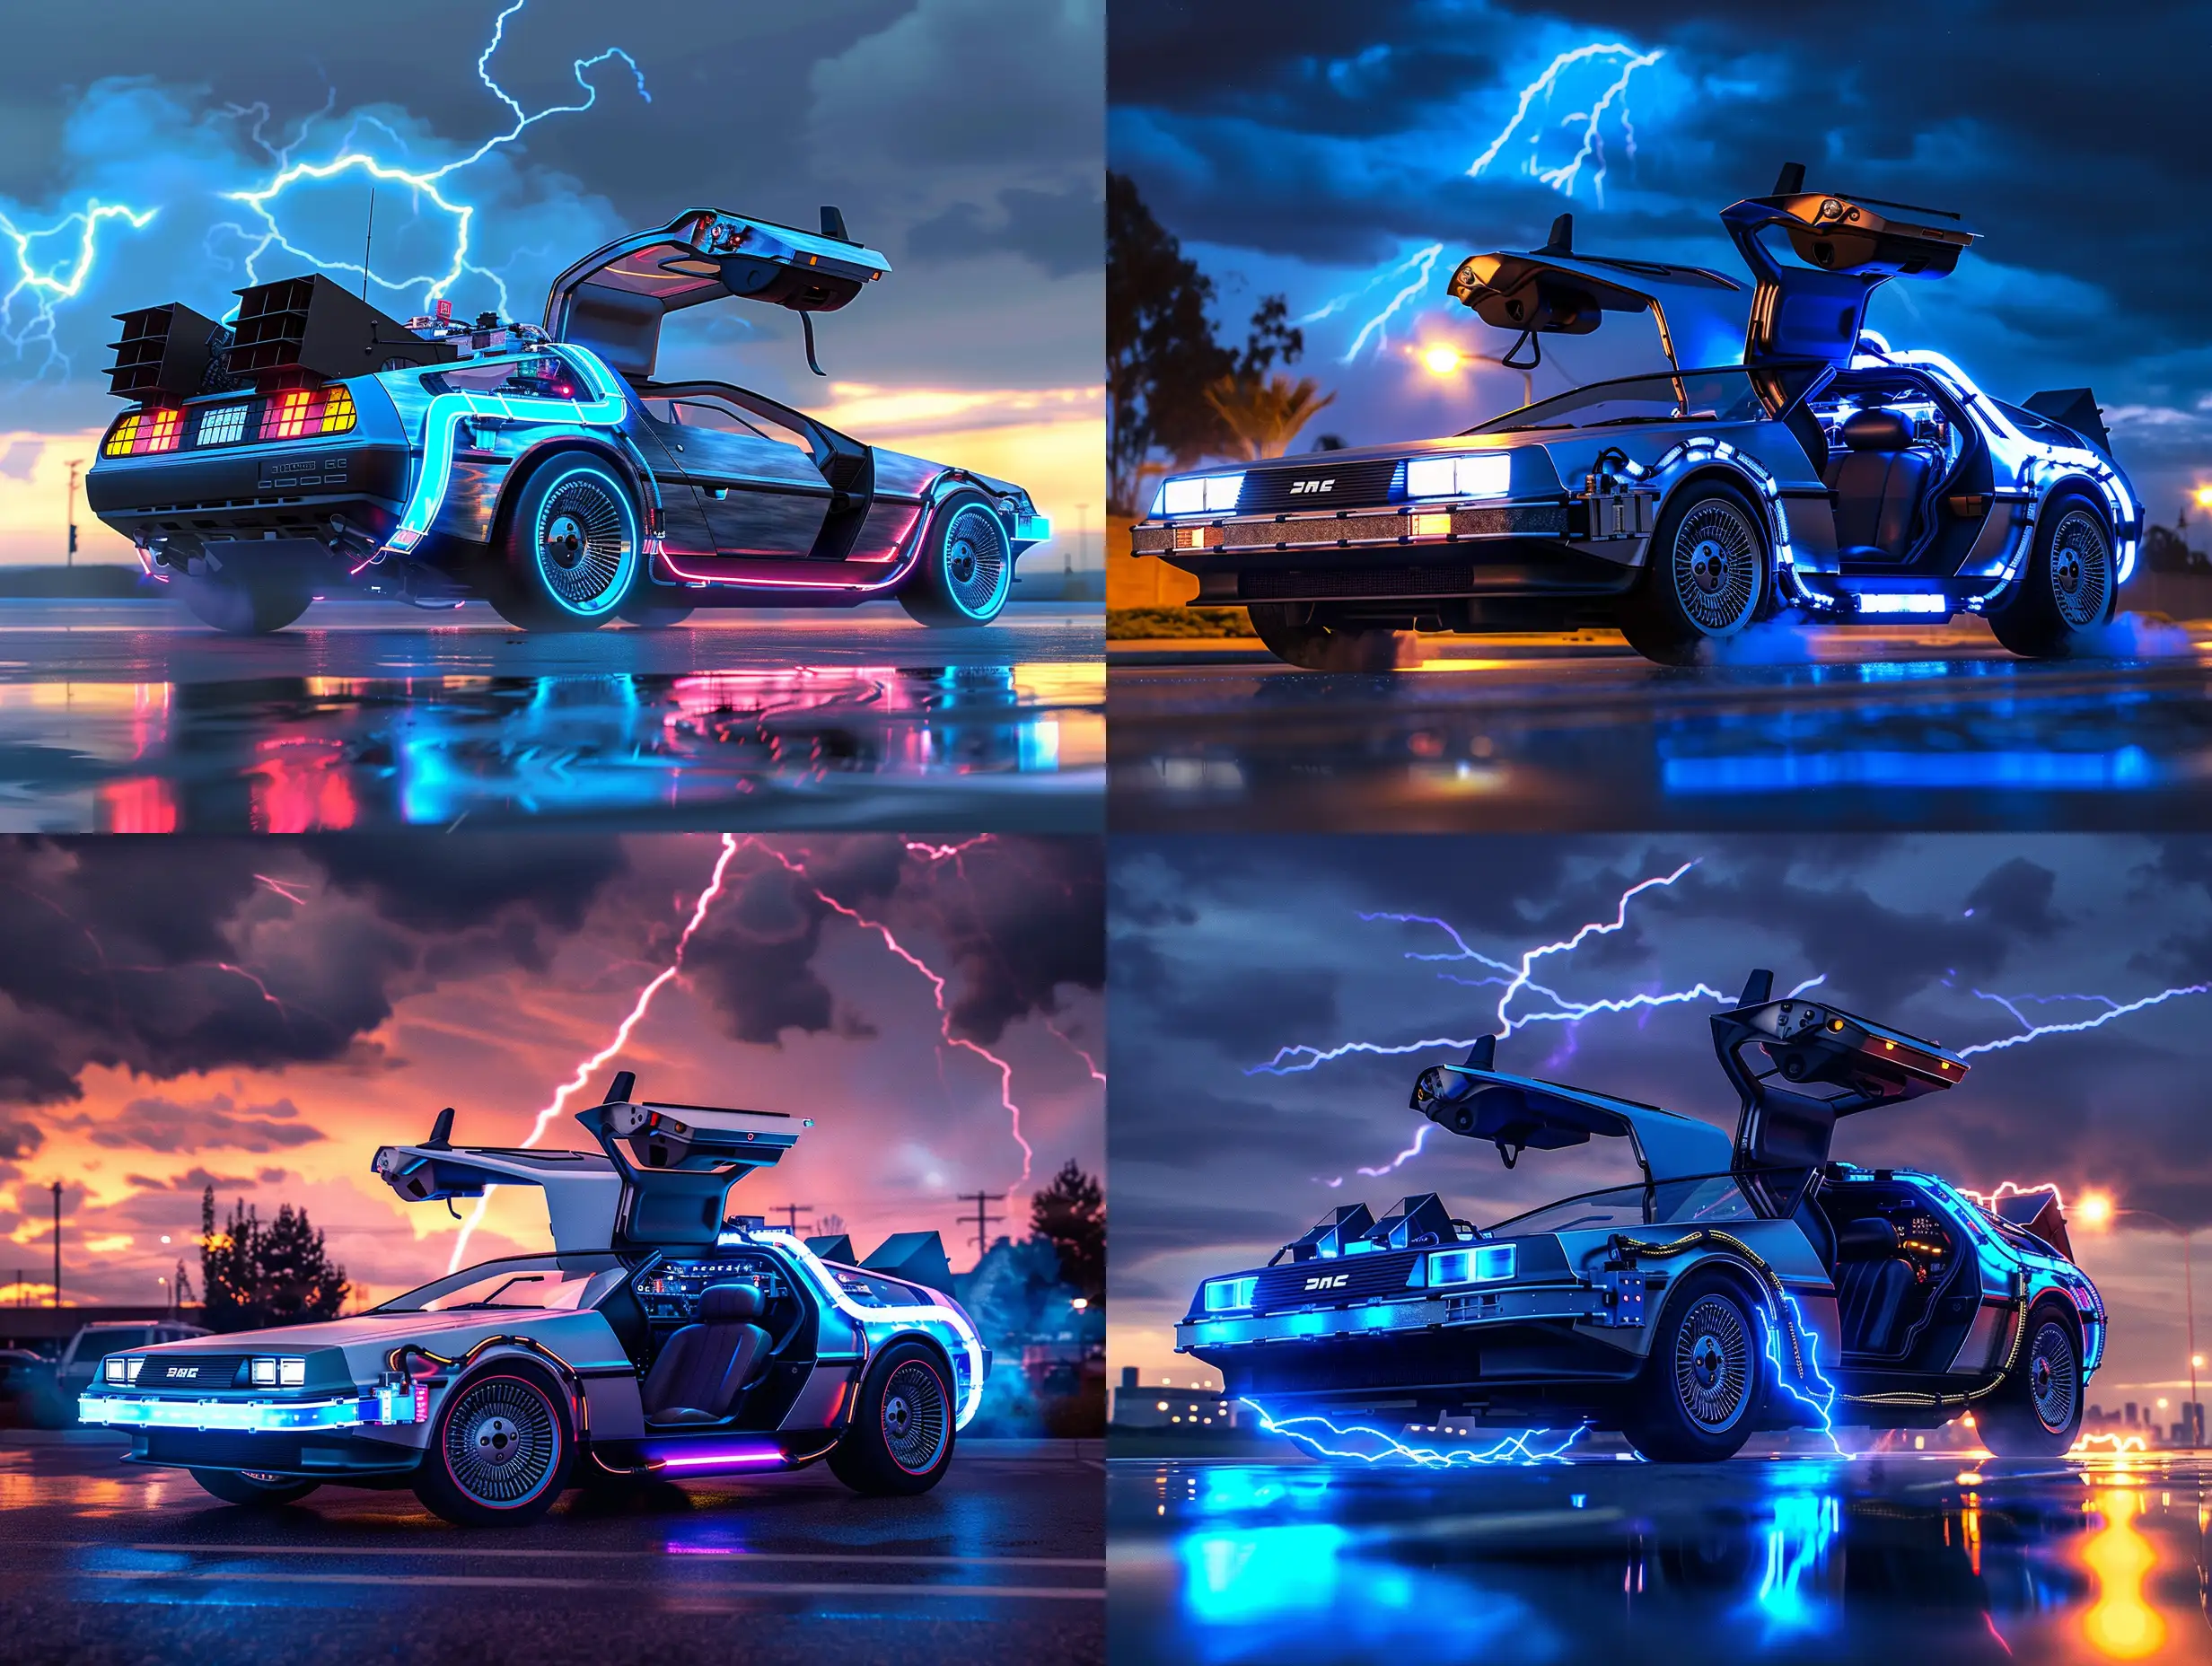 Back-to-the-Future-DeLorean-with-Blue-Lightning-and-Fire-Trails-in-a-SciFi-Landscape